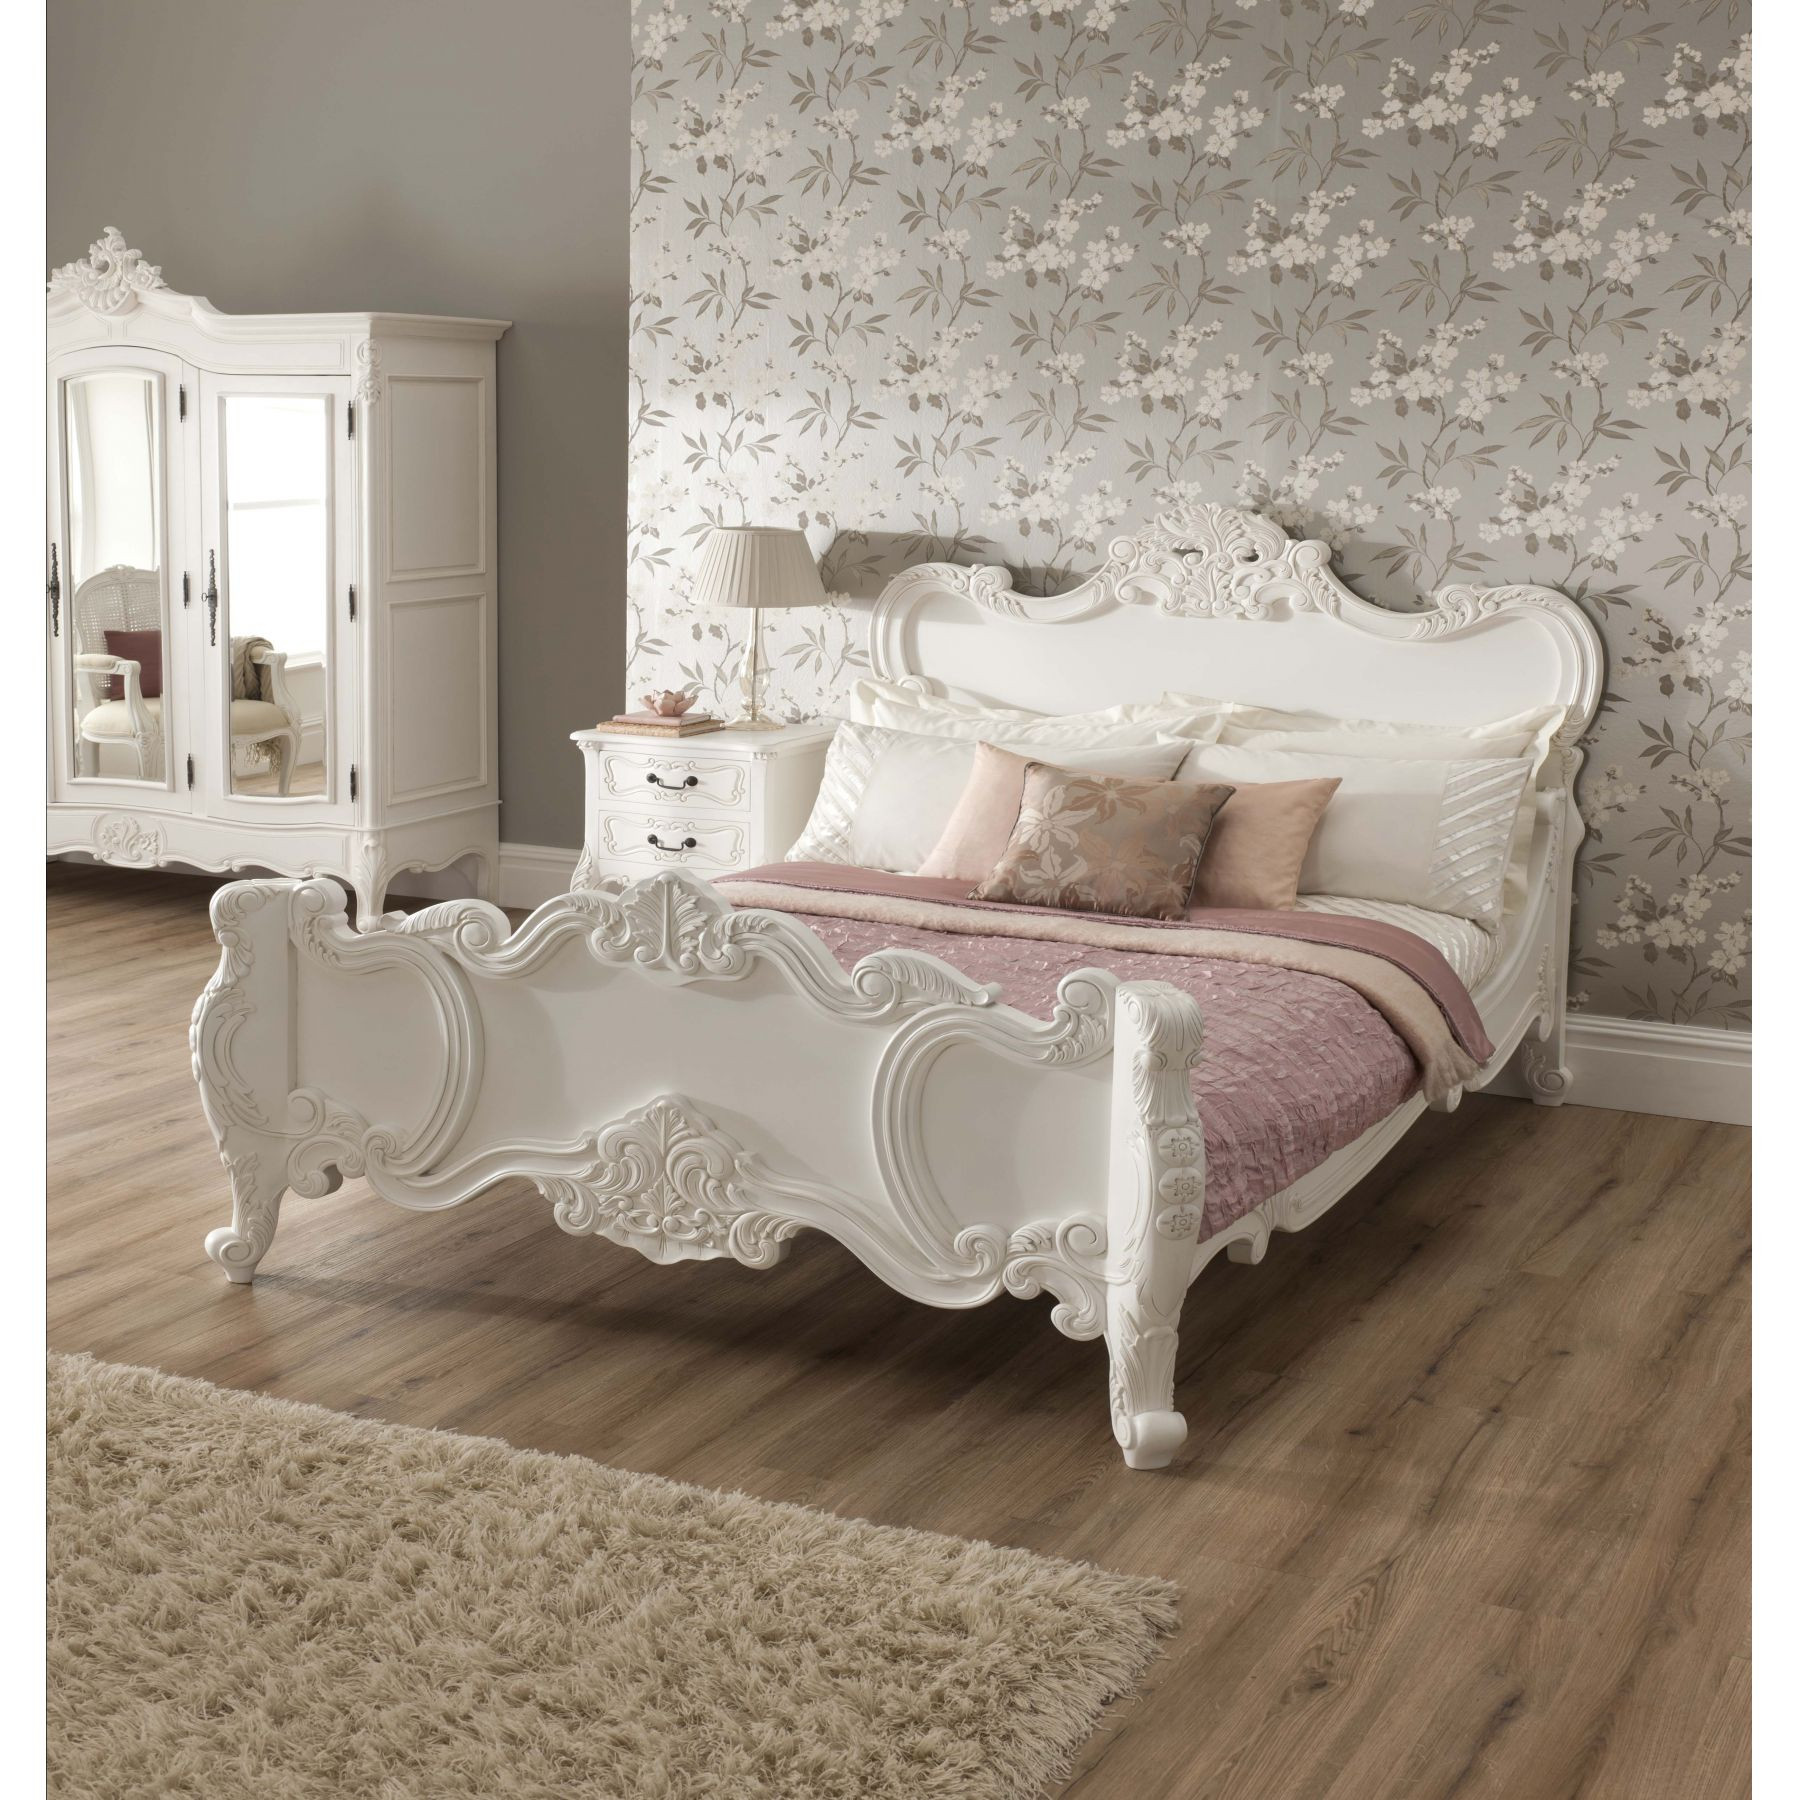 Shabby Chic Bedroom Furniture
 Vintage Your Room with 9 Shabby Chic Bedroom Furniture